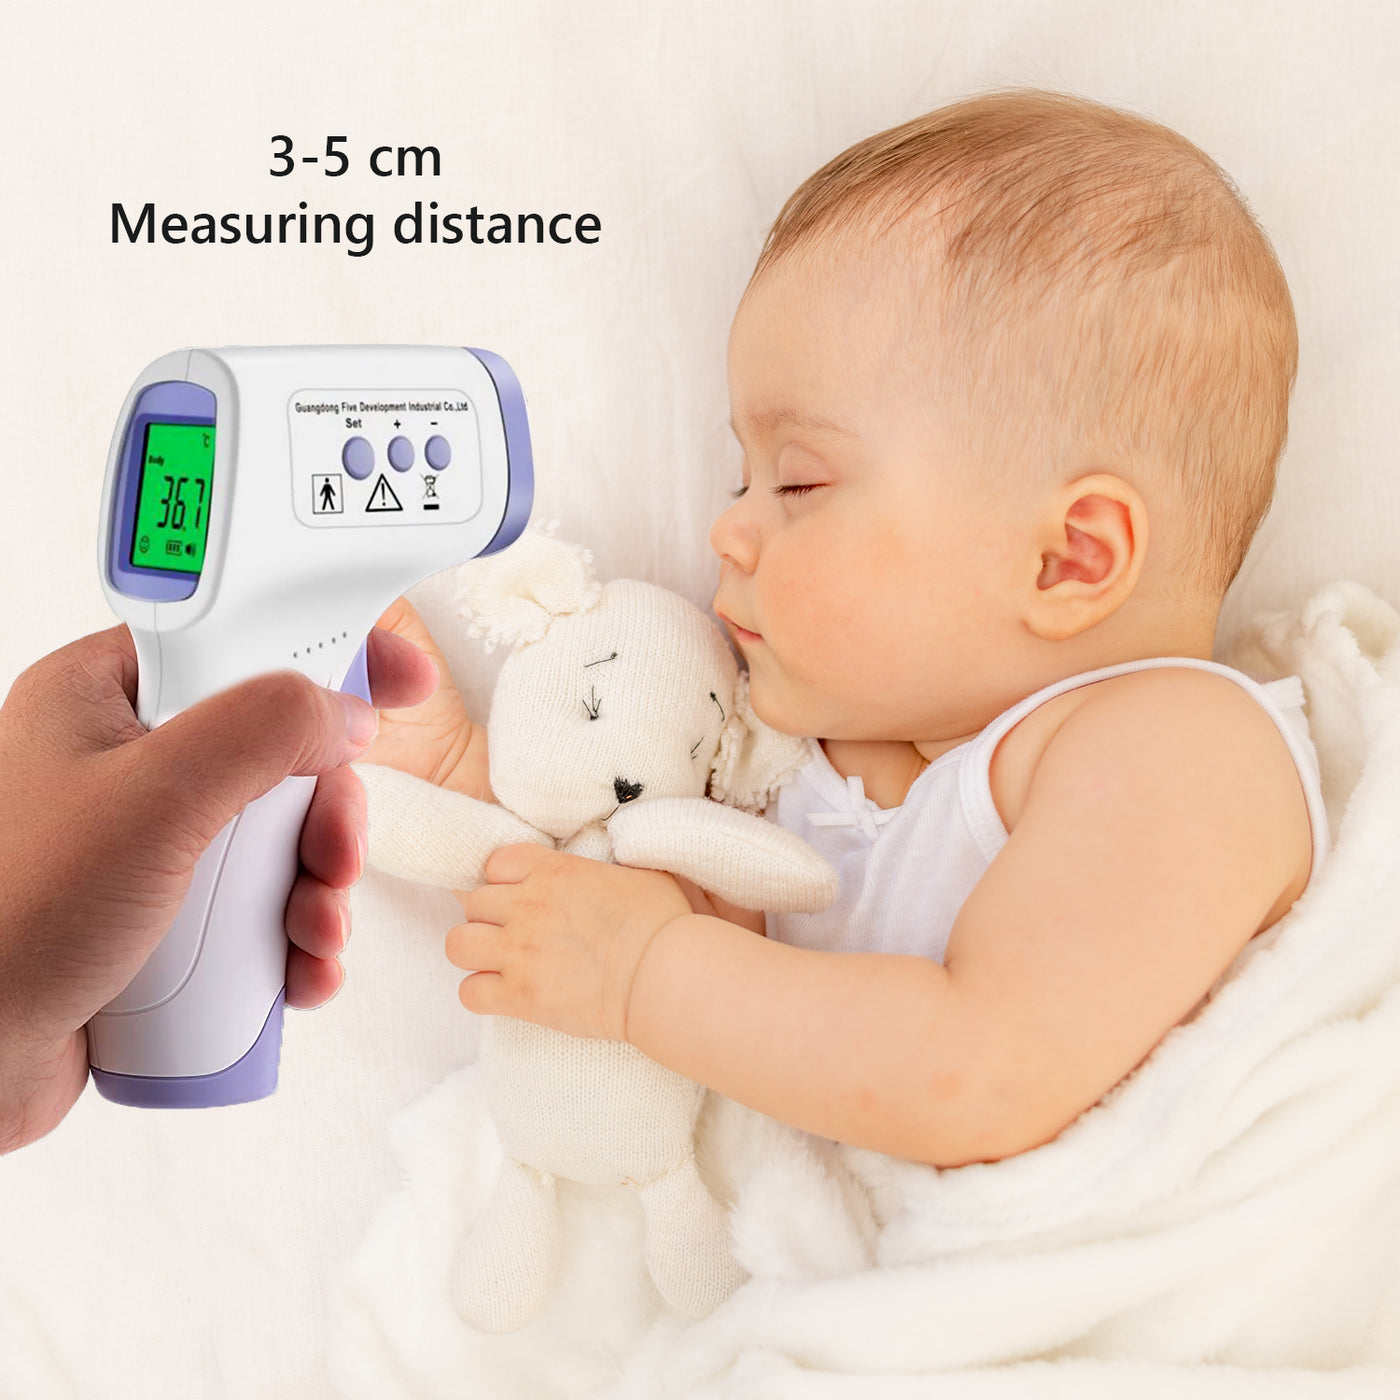 Digital Infrared Thermometer for Adults, Children, & Infants, CE Approved UK, Non-Contact Forehead Thermometer, Fever Alarm, Instant, Accurate & Fast Reading, 3 Color Lighting Display (6838809460835)